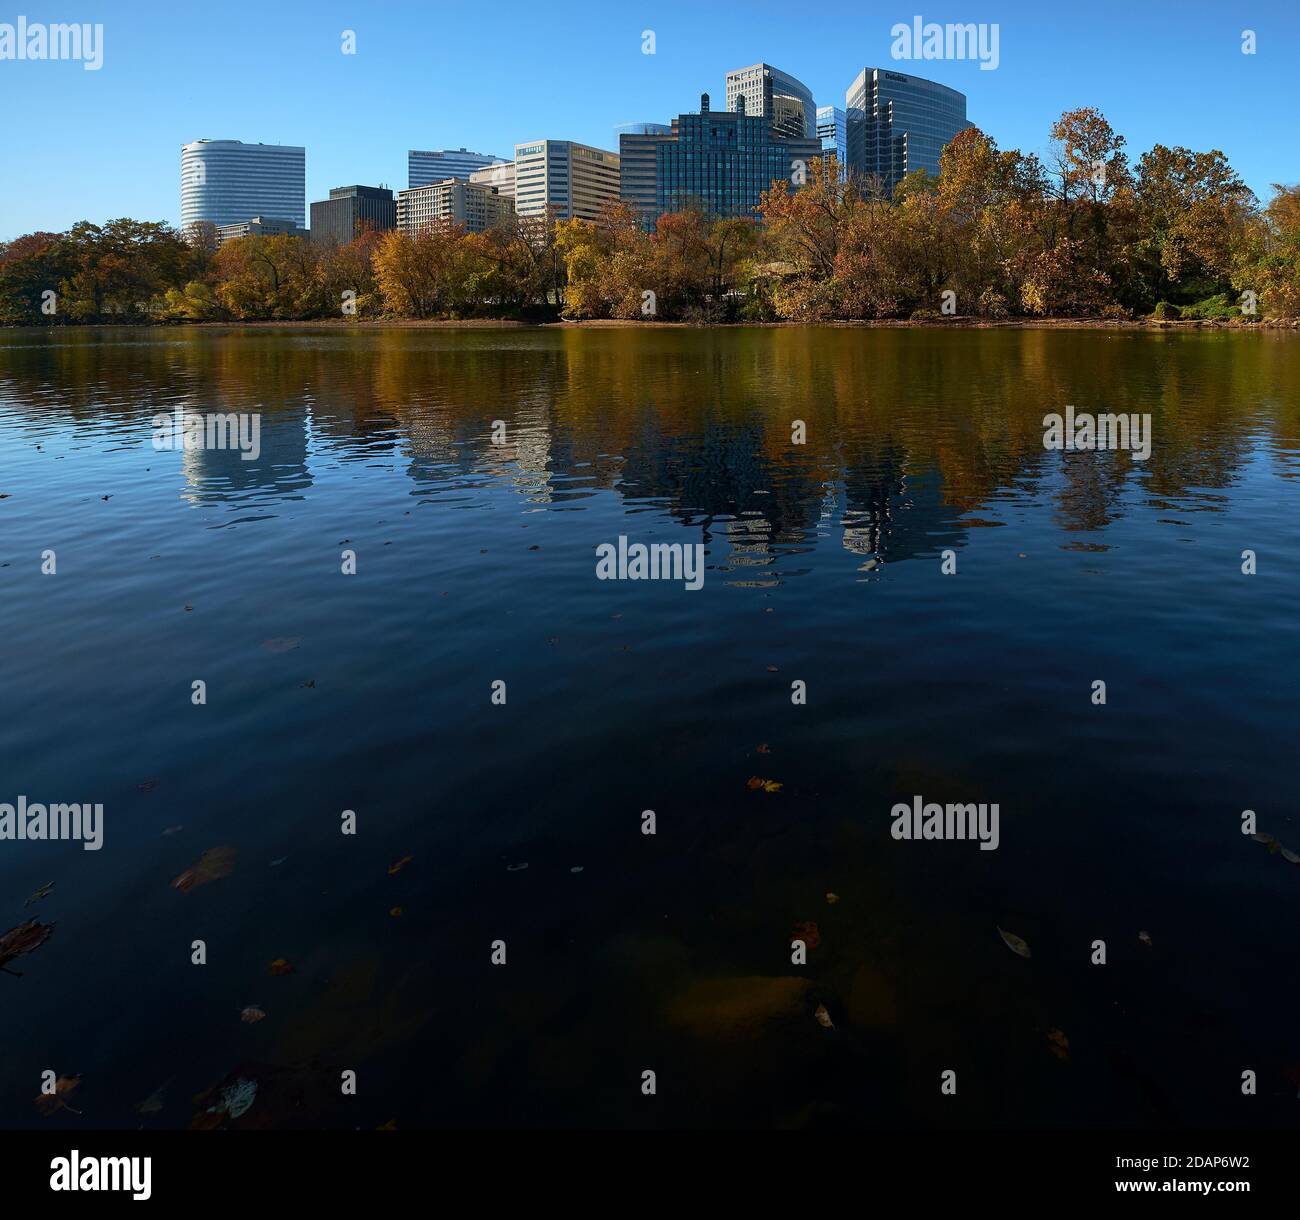 The view of the downtown Rosslyn skyline from across the Potomac river during fall, autumn with leaves changing. In Rosslyn, Arlington, Virginia. Stock Photo